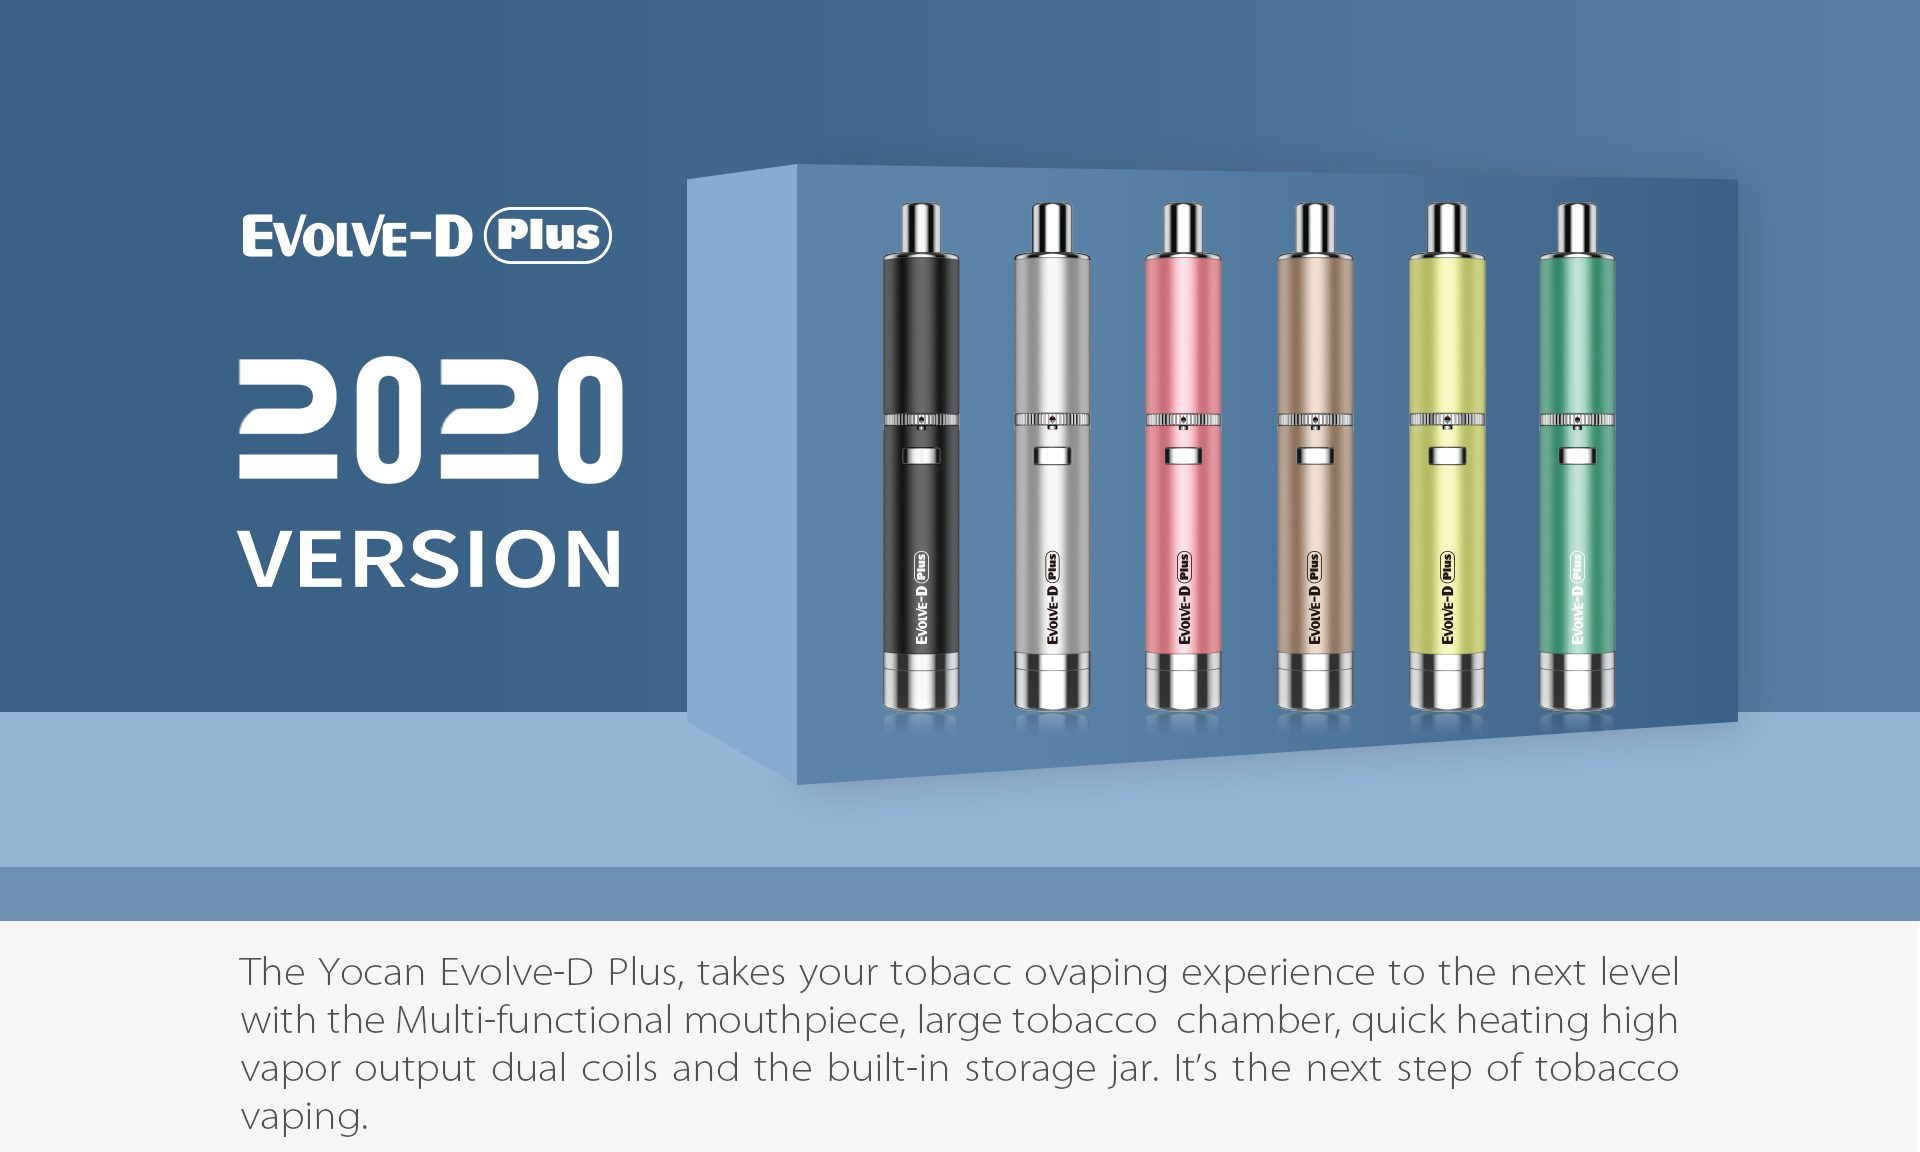 Toke on the go conveniently and discreetly with the Yocan Evolve-D Plus 2020 version easy to use e-pipe combustion pen for dry herb and flower blends.